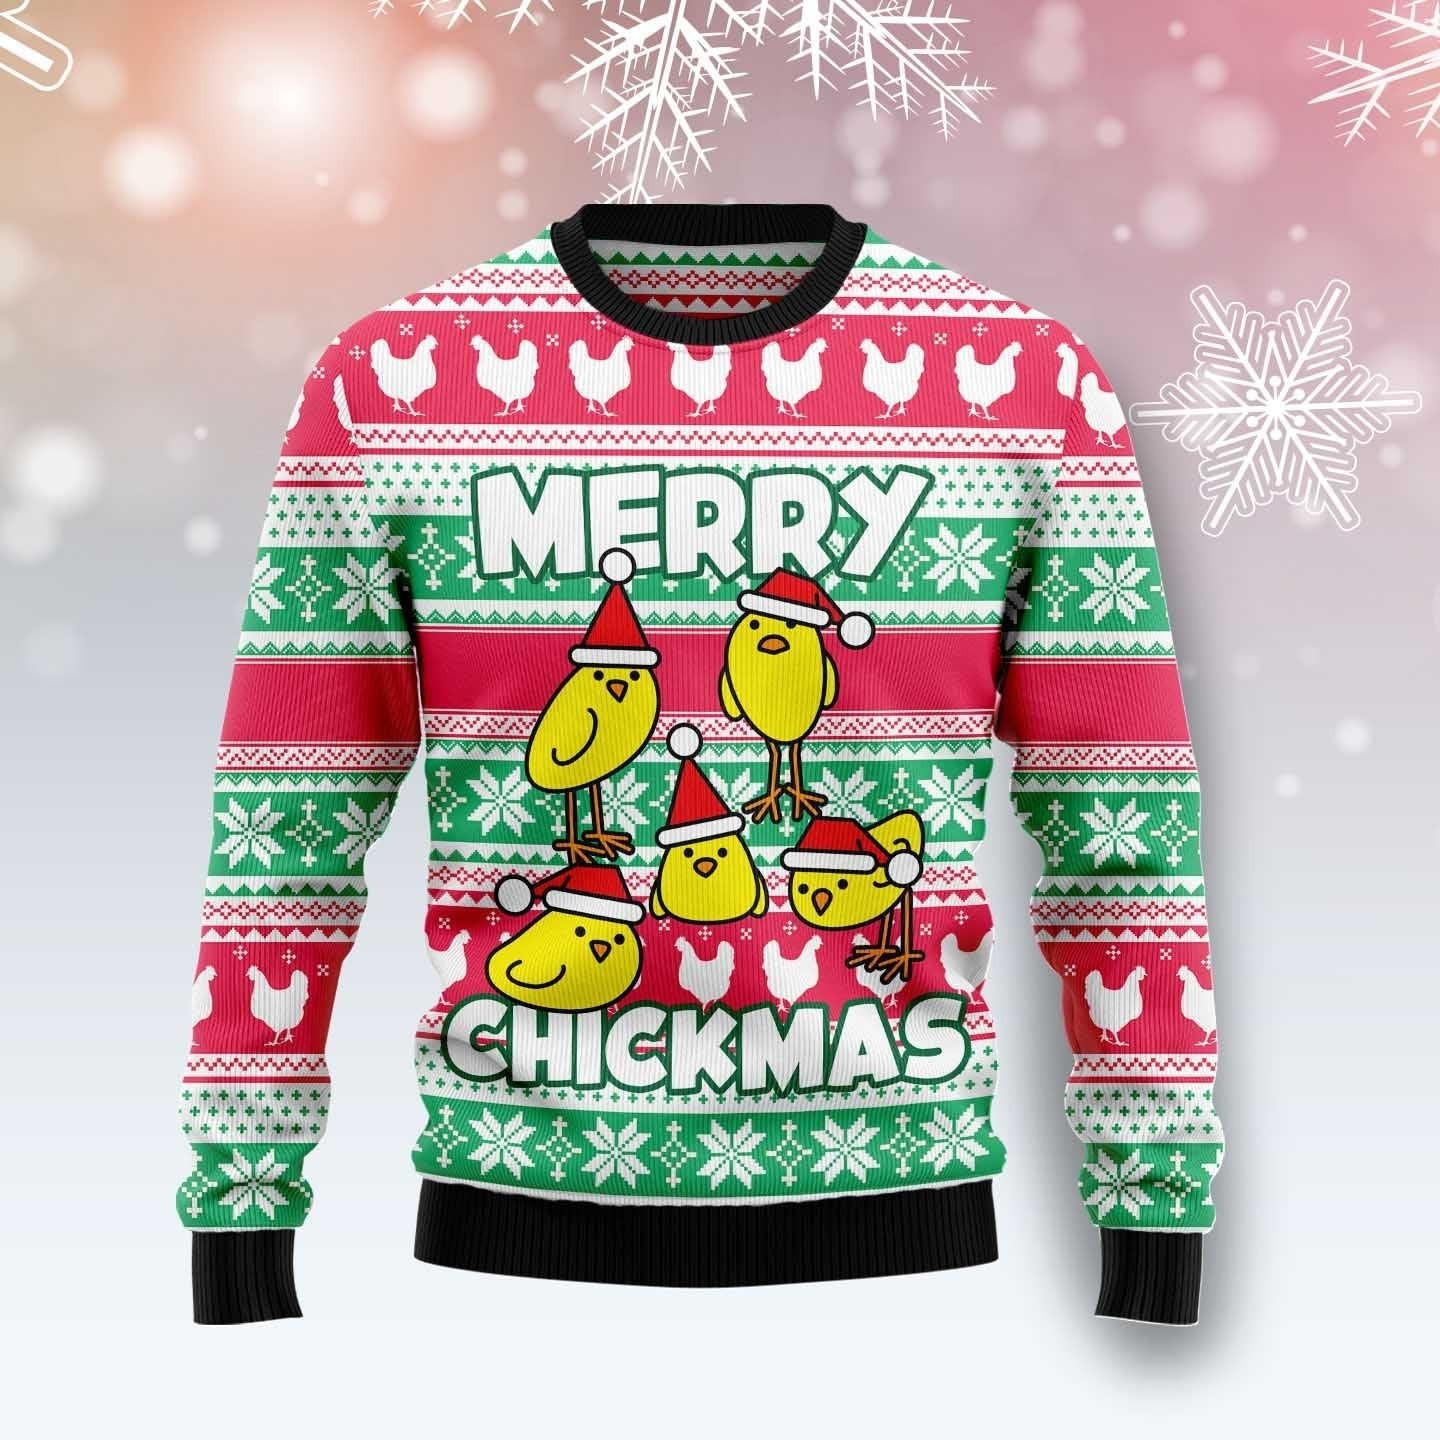 Merry Chickmas Ugly Christmas Sweater, Ugly Sweater For Men Women, Holiday Sweater